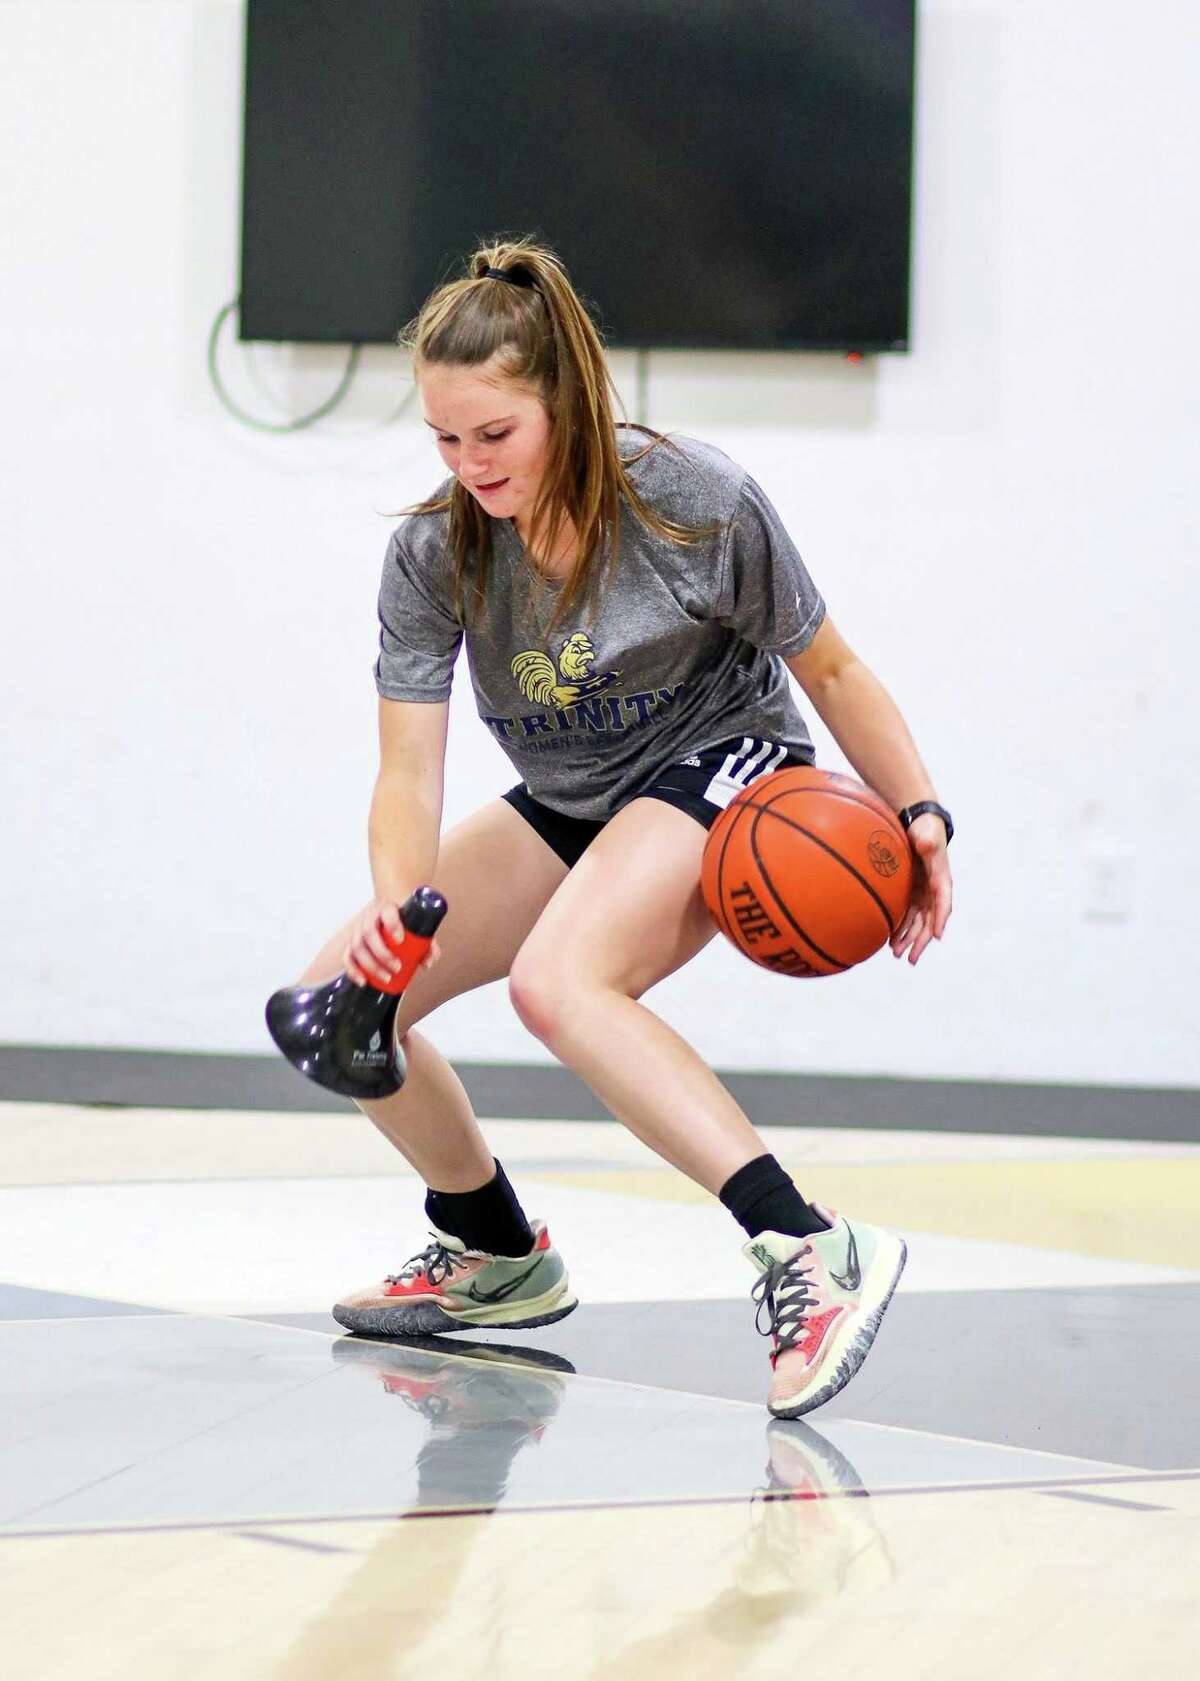 Revolution Basketball Training expands into Milford